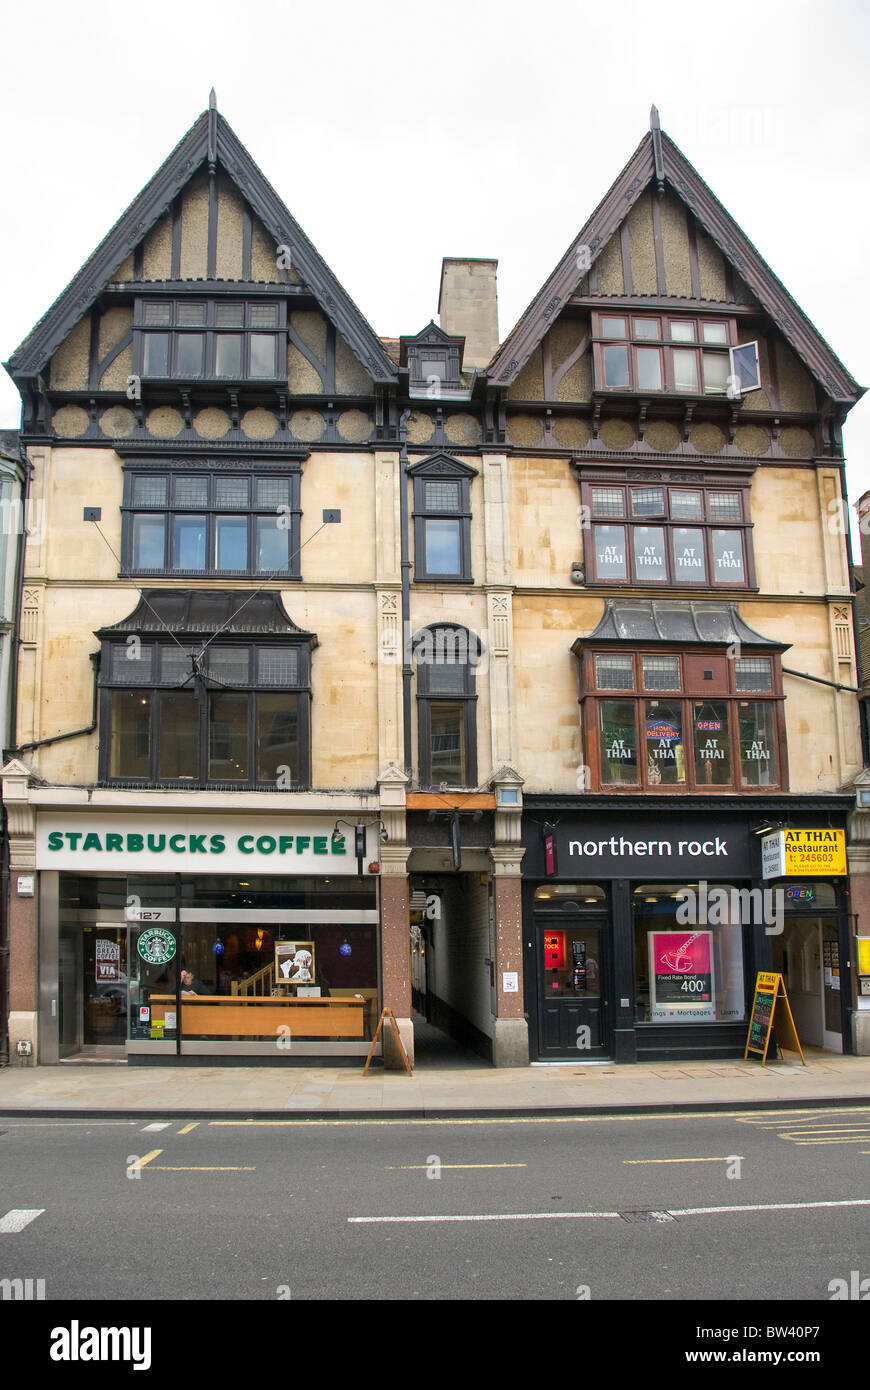 Starbucks coffee shop and Northern Rock Bank situated in historic houses, High Street, Oxford, Oxfordshire, England, UK Stock Photo